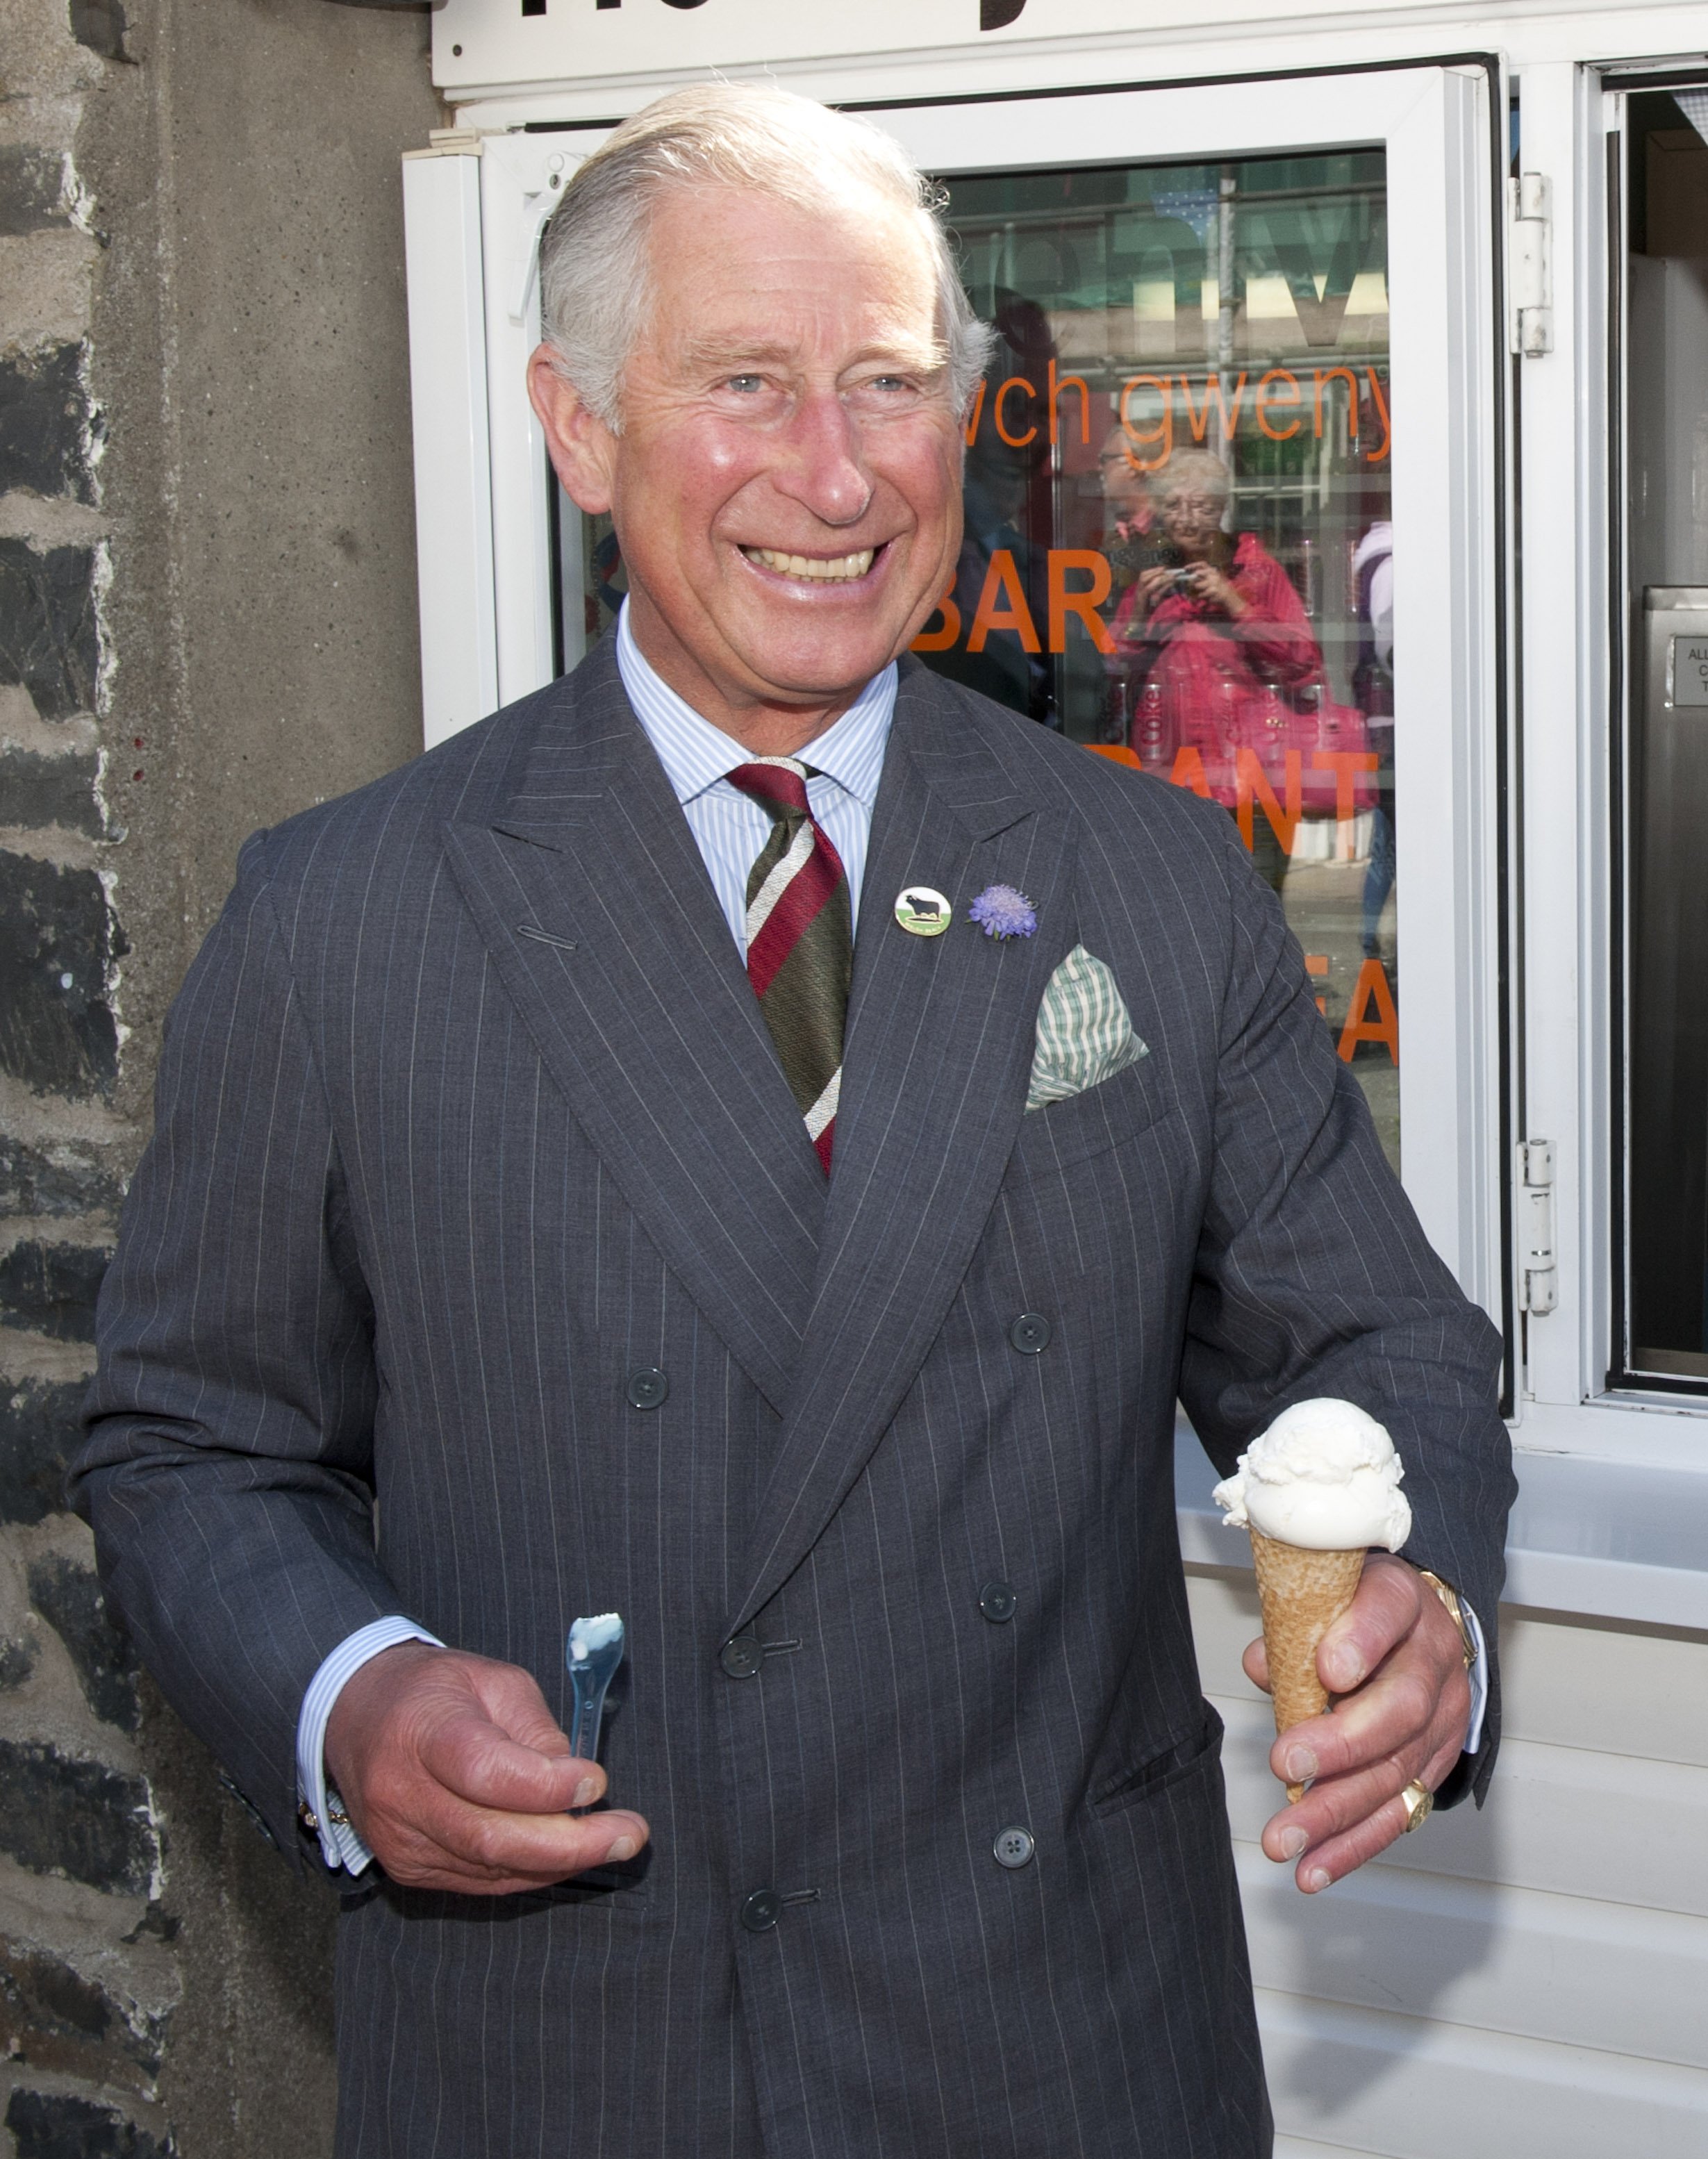 Prince Charles visits an ice cream shop in Wales